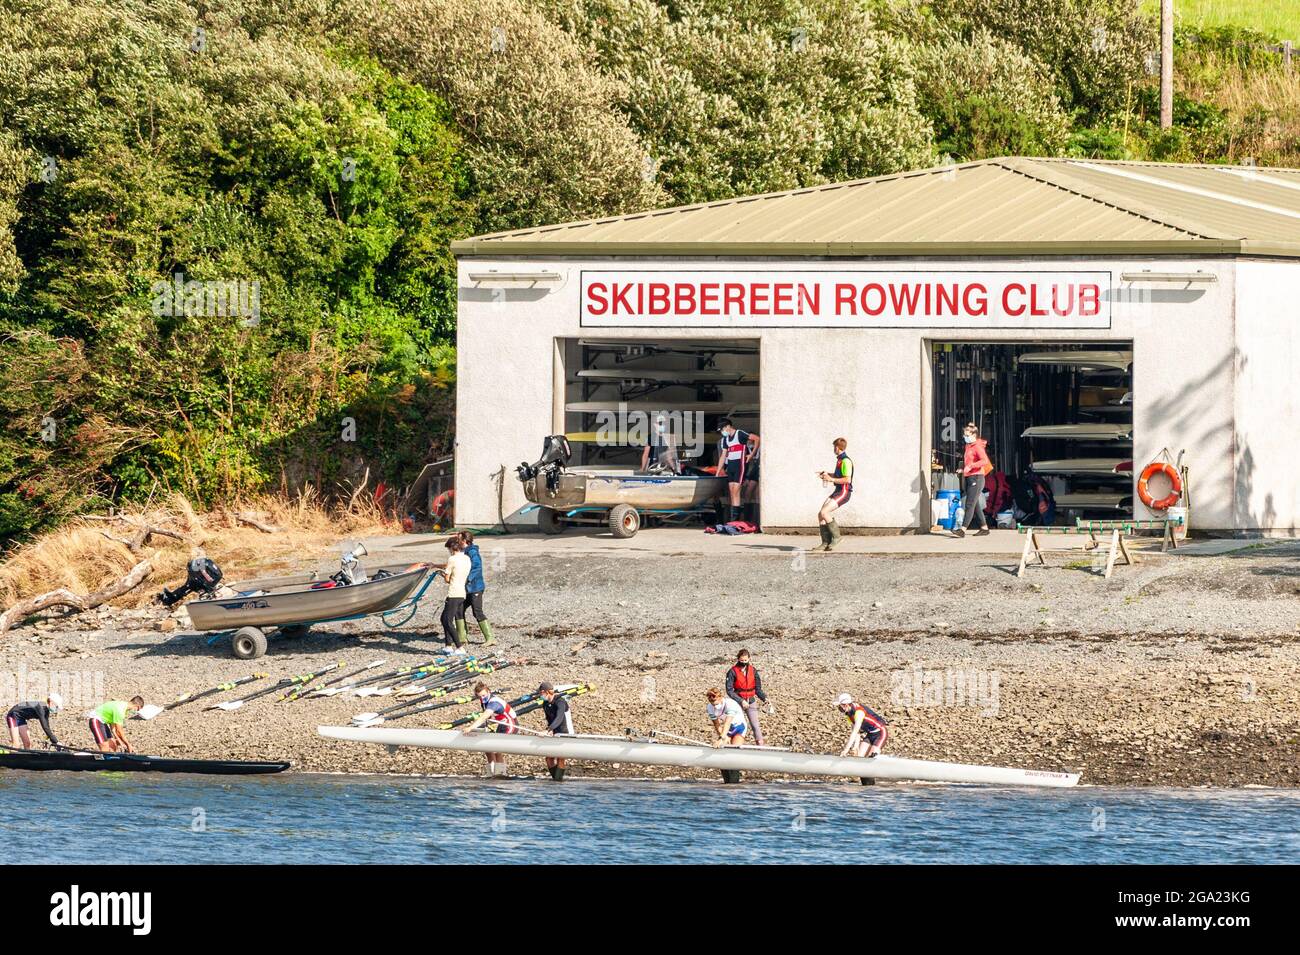 Skibbereen, West Cork, Ireland. 28th July, 2021. People of Skibbereen town were today preparing to support the Irish rowers competing in tomorrow morning's Mens Lightweight Double Sculls Final. Rowers Fintan McCarthy and Skibbereen's Paul O'Donovan go for gold at 1.50am. Rowers at Skibbereen Rowing Club, where Paul O'Donovan was brought up with rowing, were starting a training session, perhaps hoping to be Olympians in the future. Credit: AG News/Alamy Live News Stock Photo